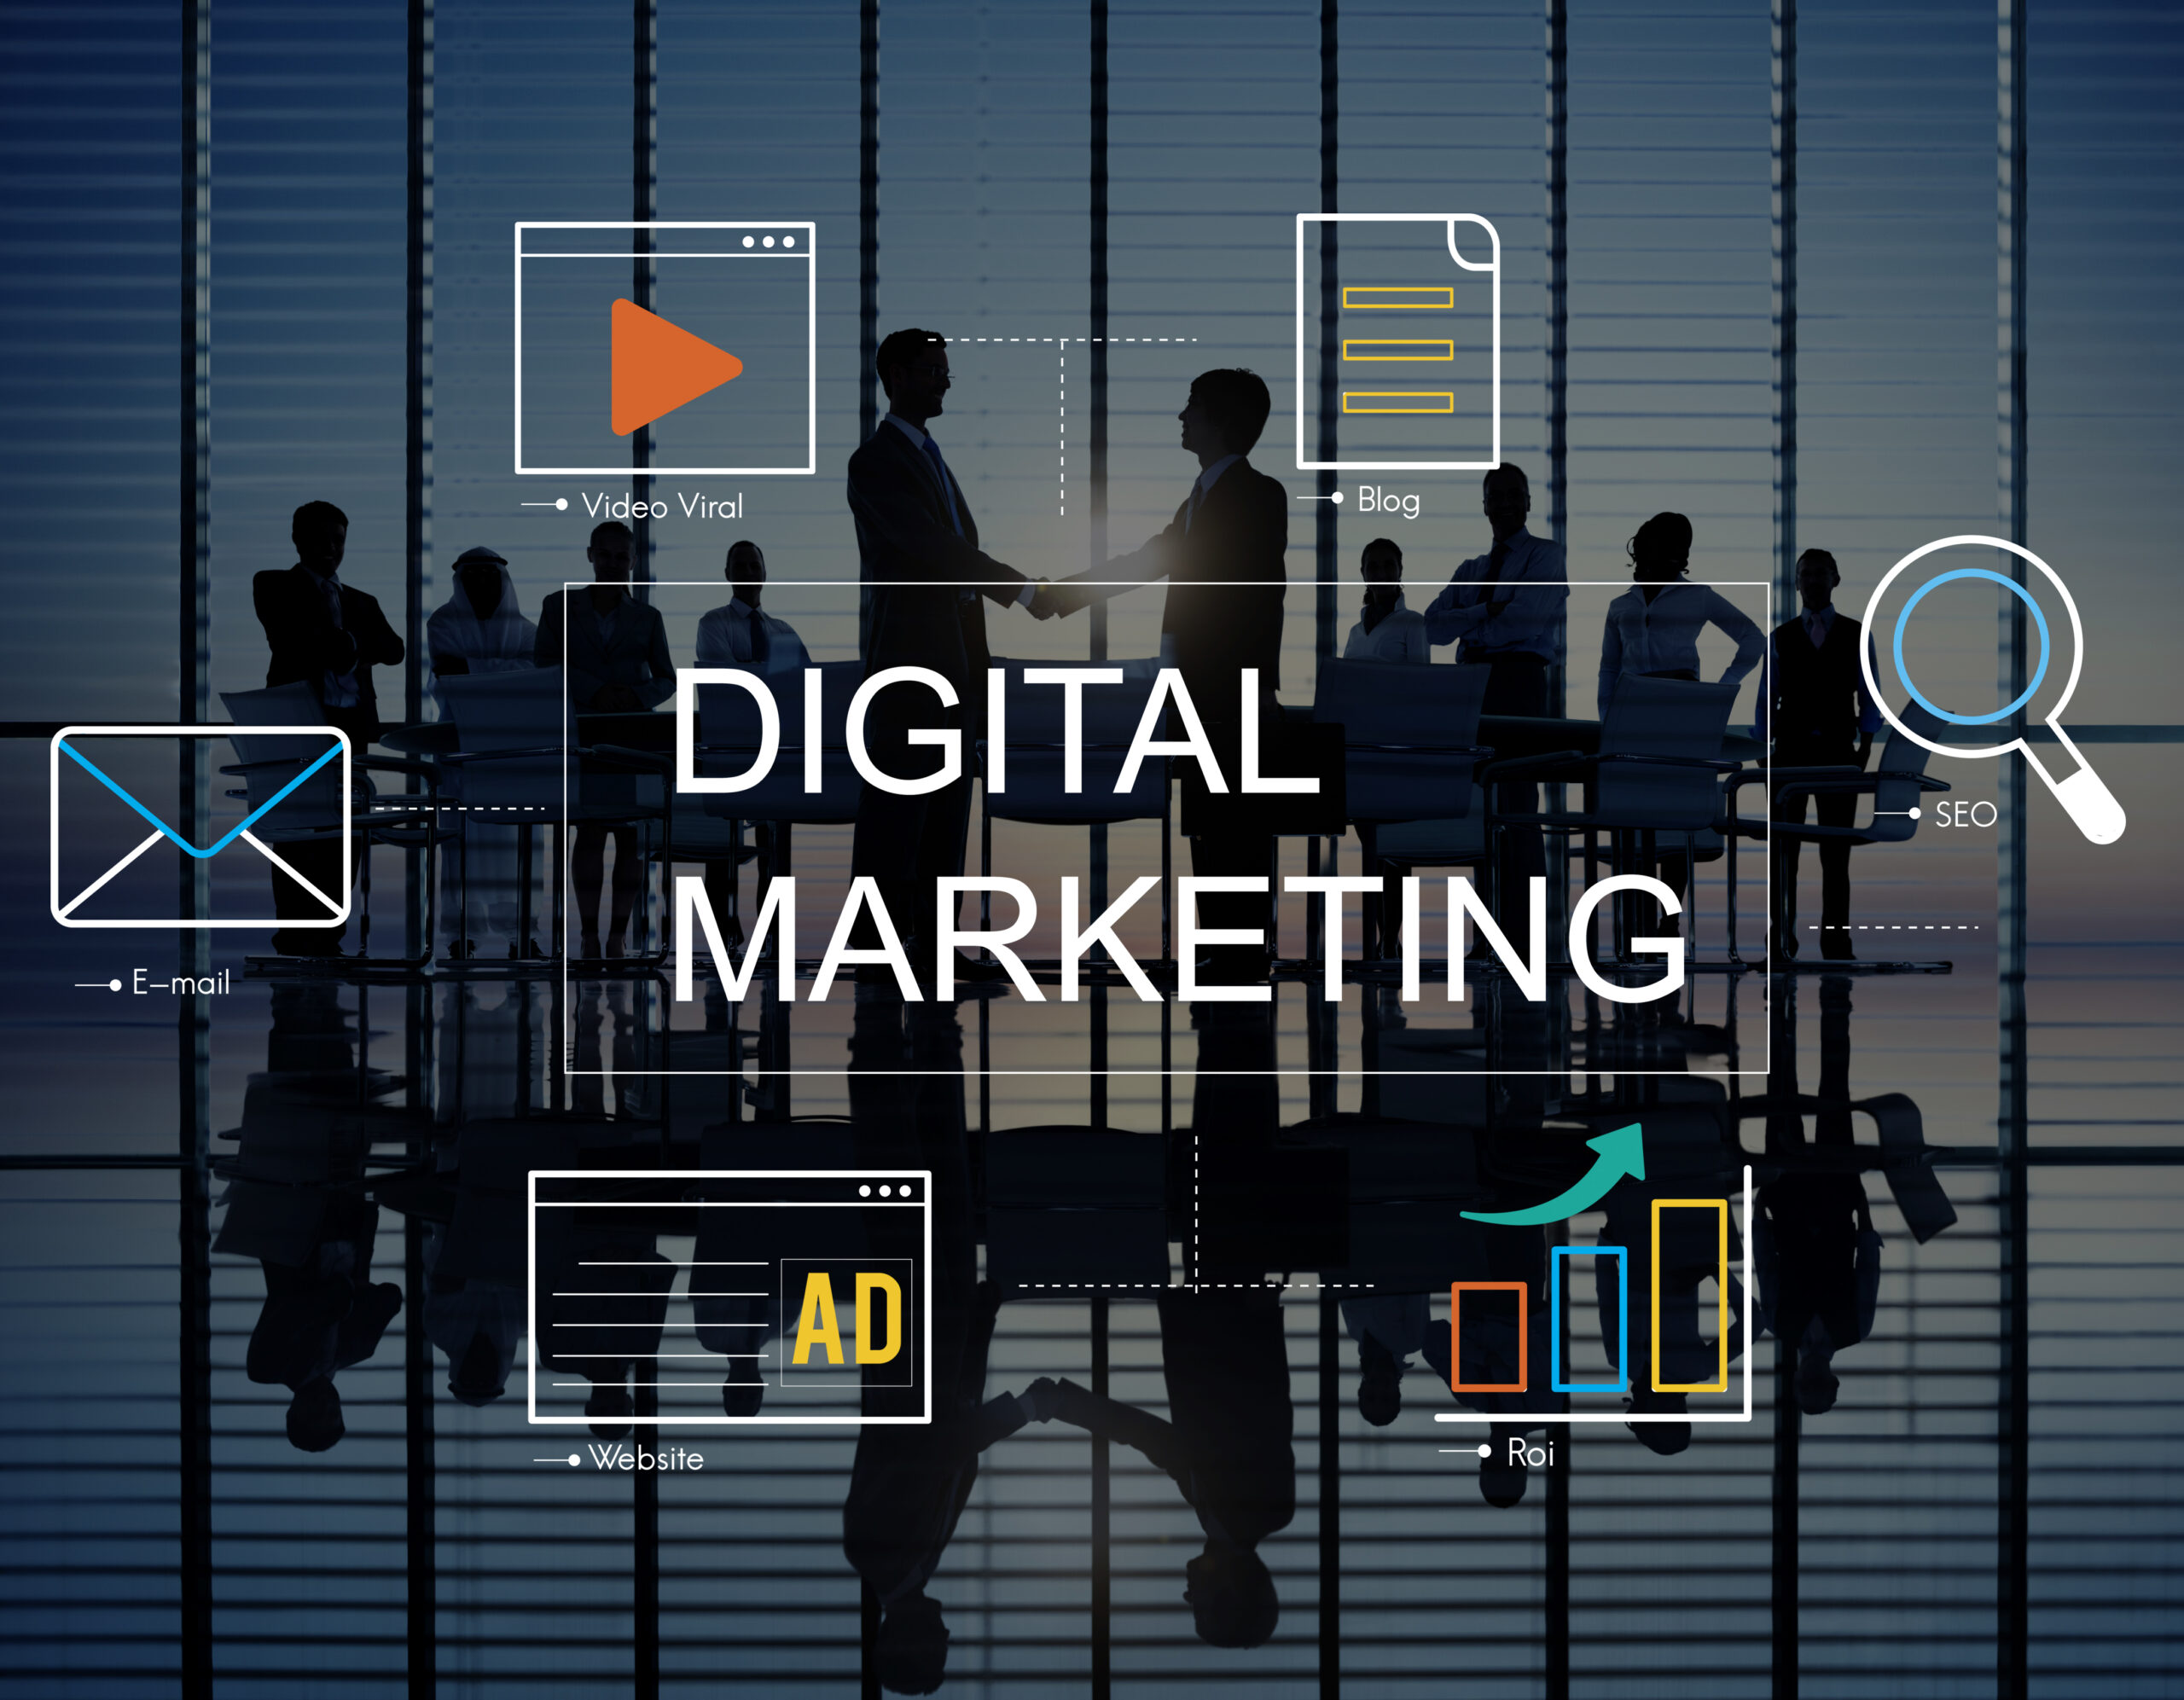 Show how digital marketing supports businesses